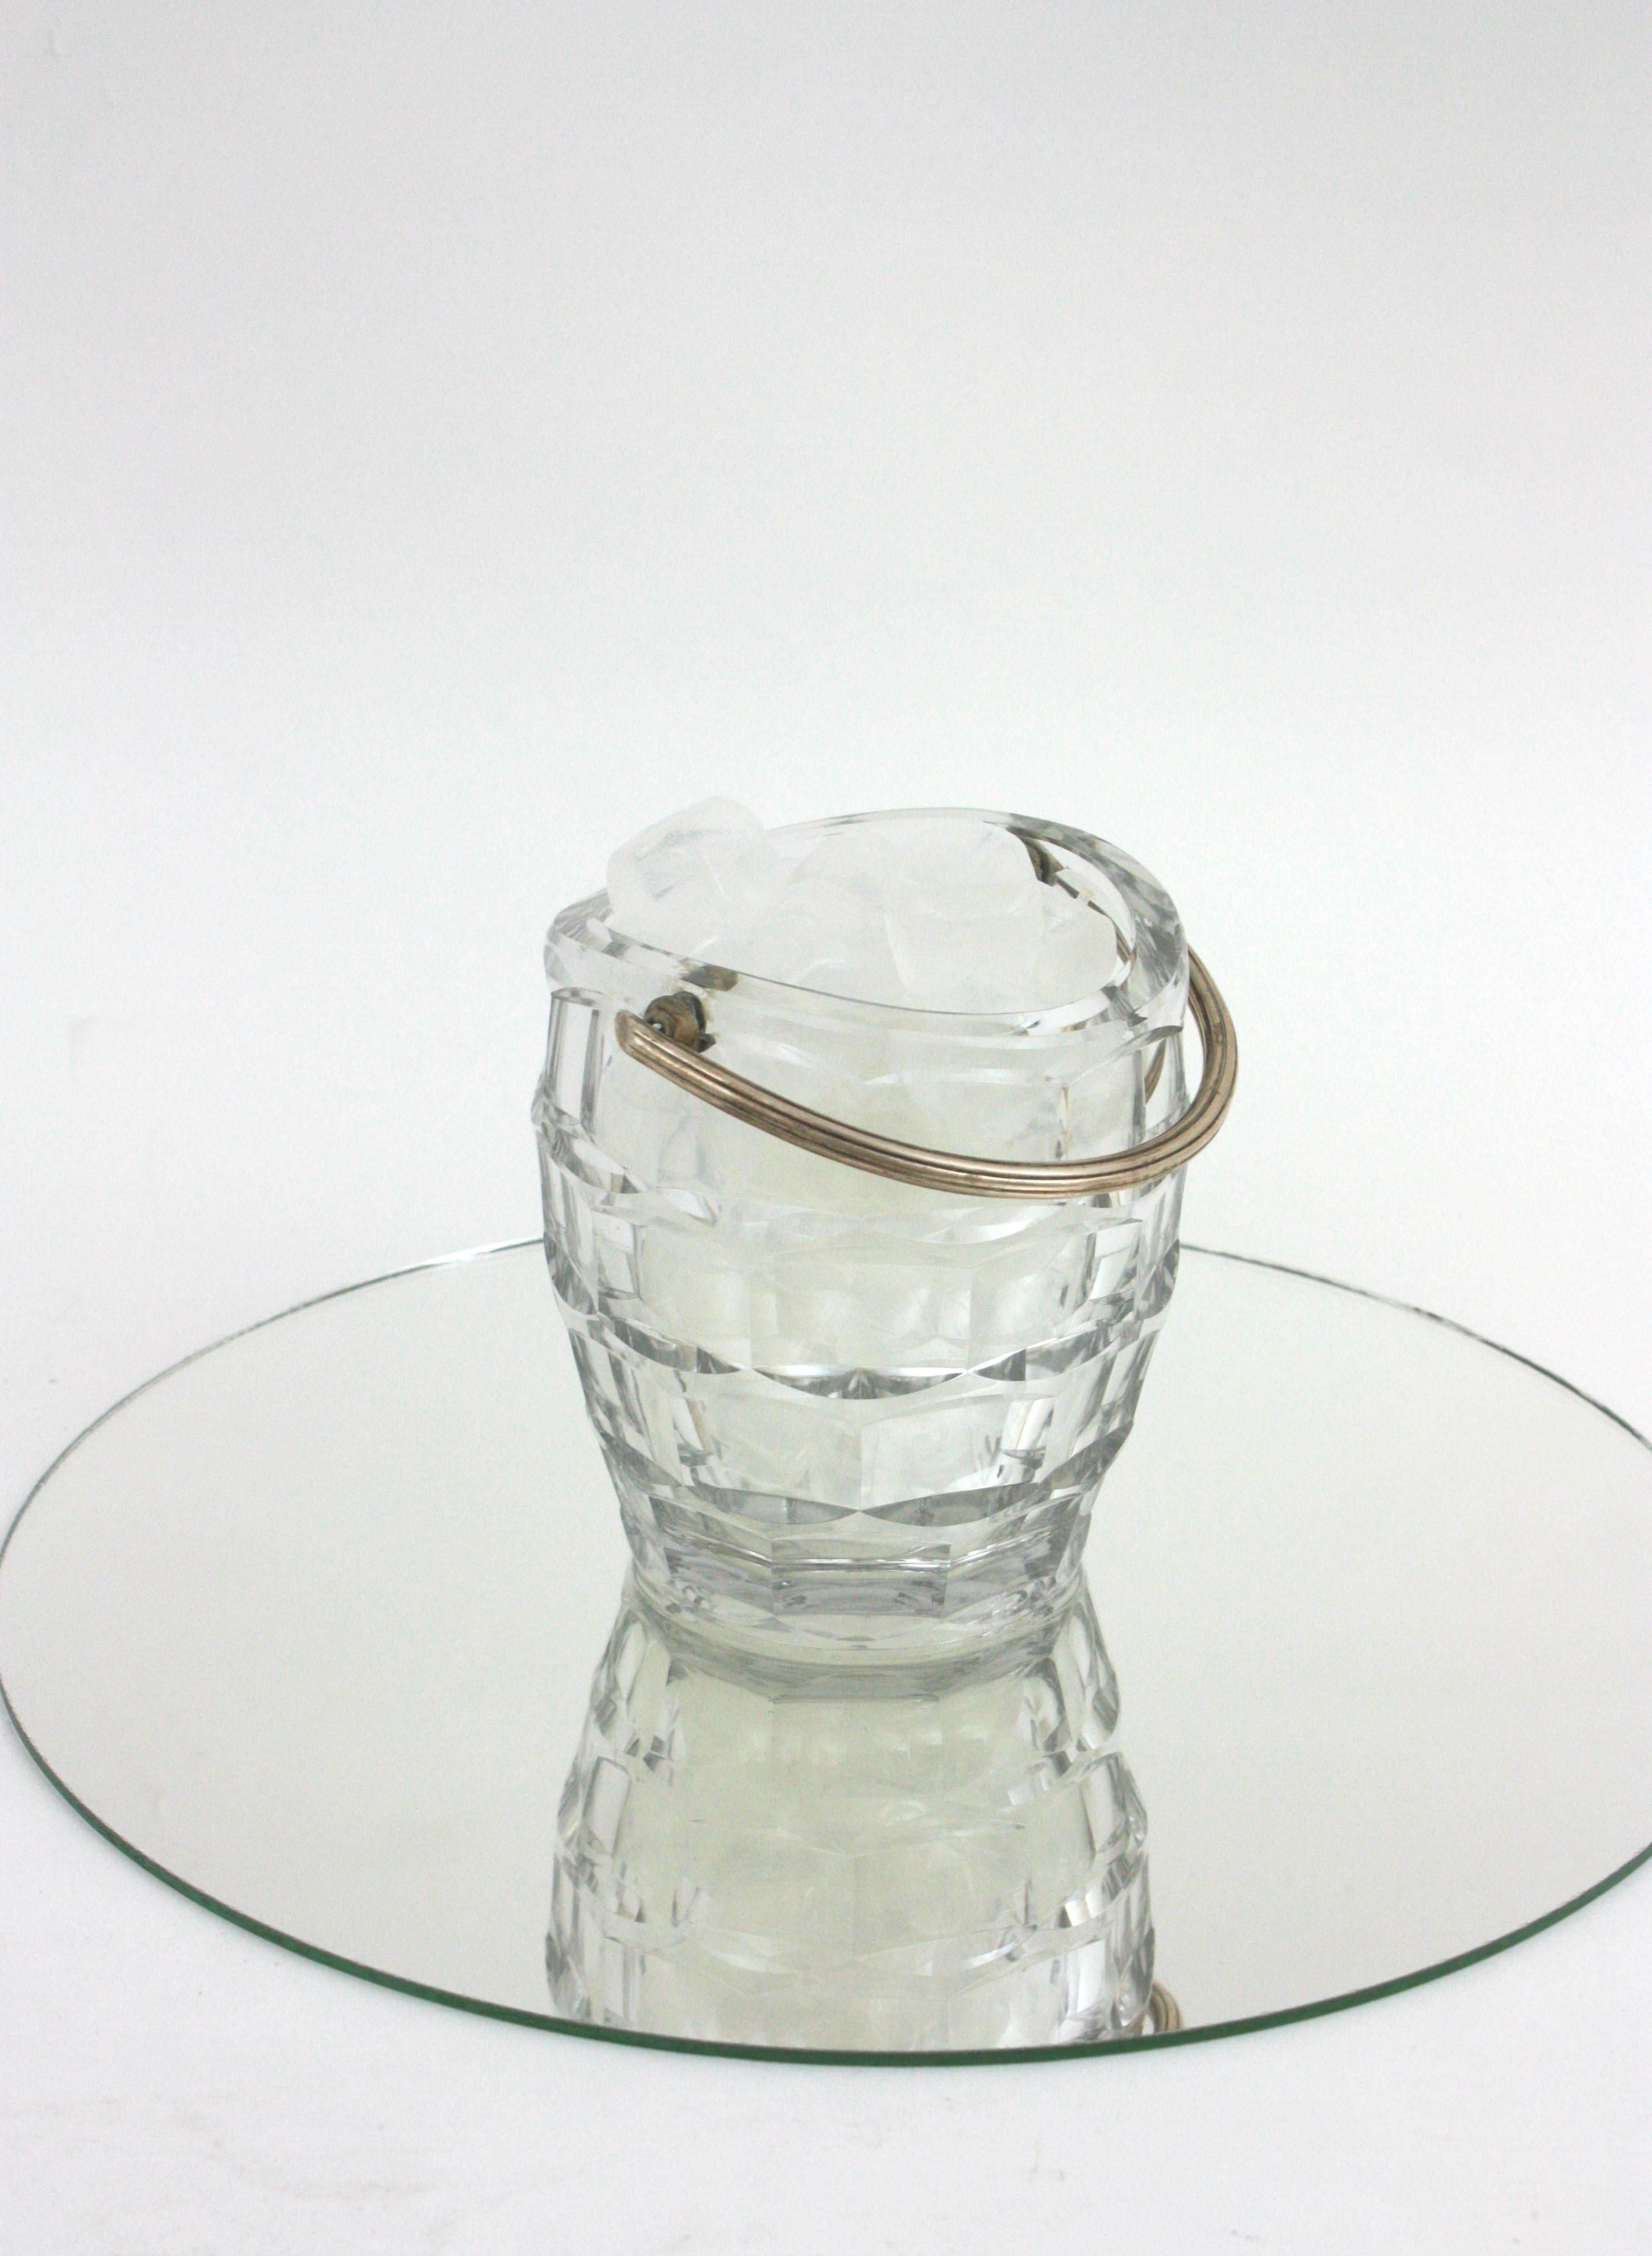 Midcentury Baccarat Cut Crystal and Silver Ice Bucket, 1950s For Sale 7